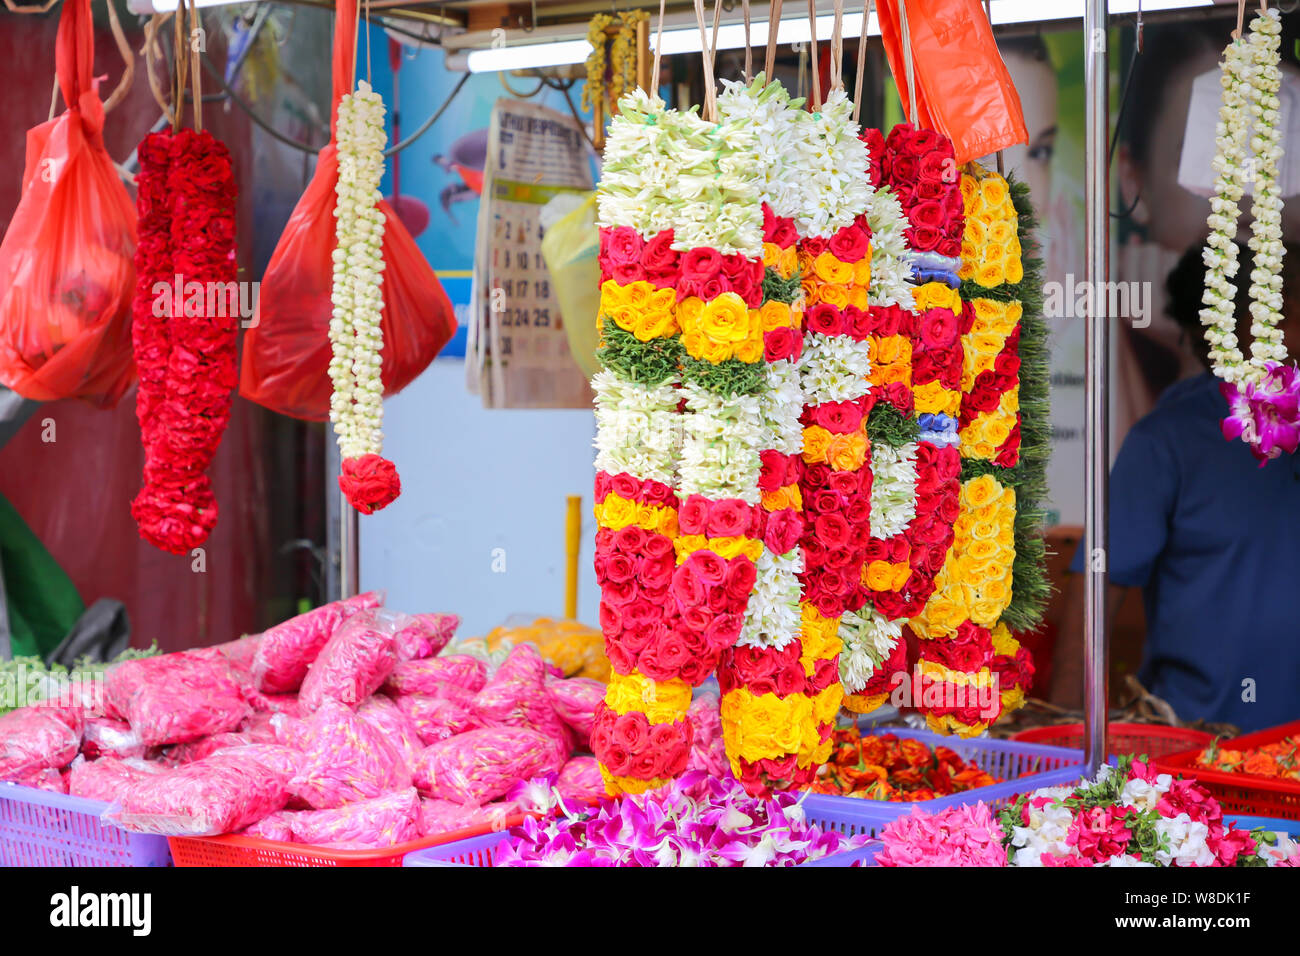 Flower garland being sold at Little India Singapore Stock Photo